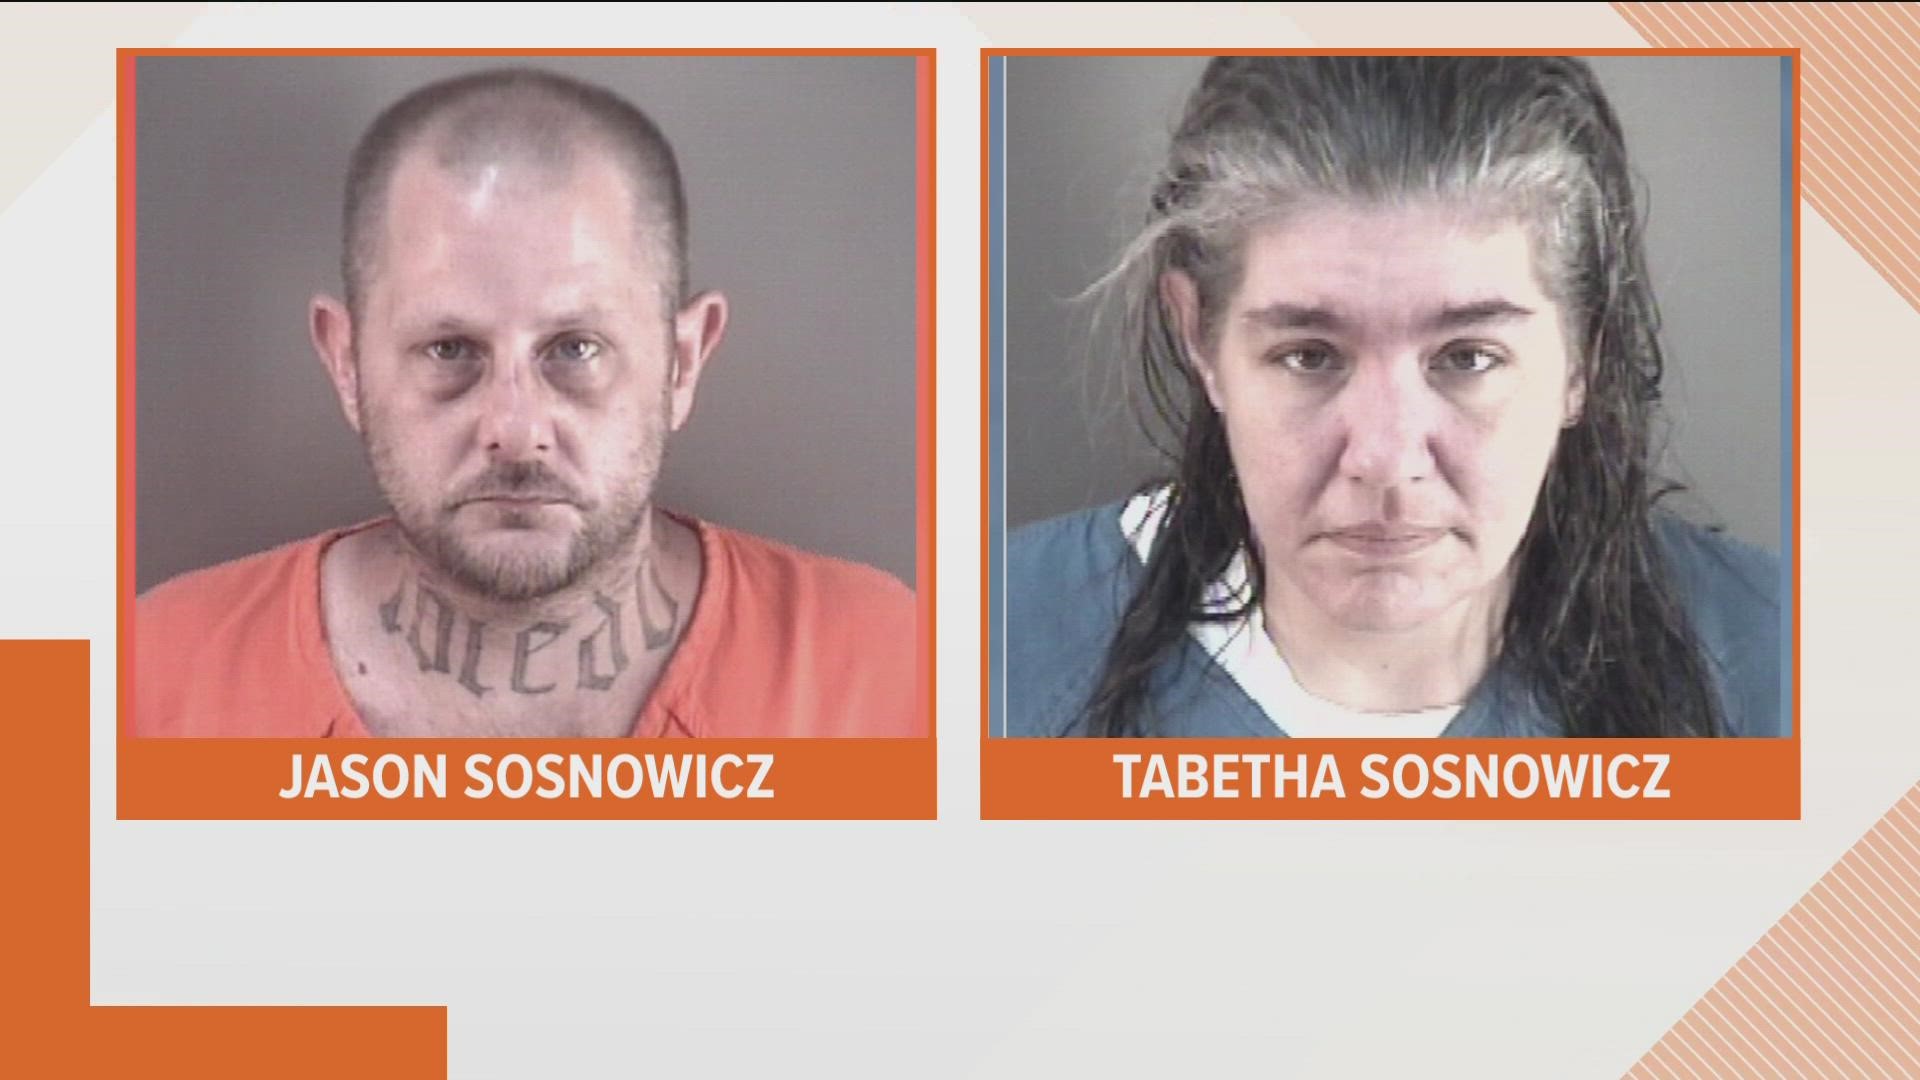 Jason and Tabetha Sosnowicz told police they tied up the boy to keep him from getting into candy as they slept.